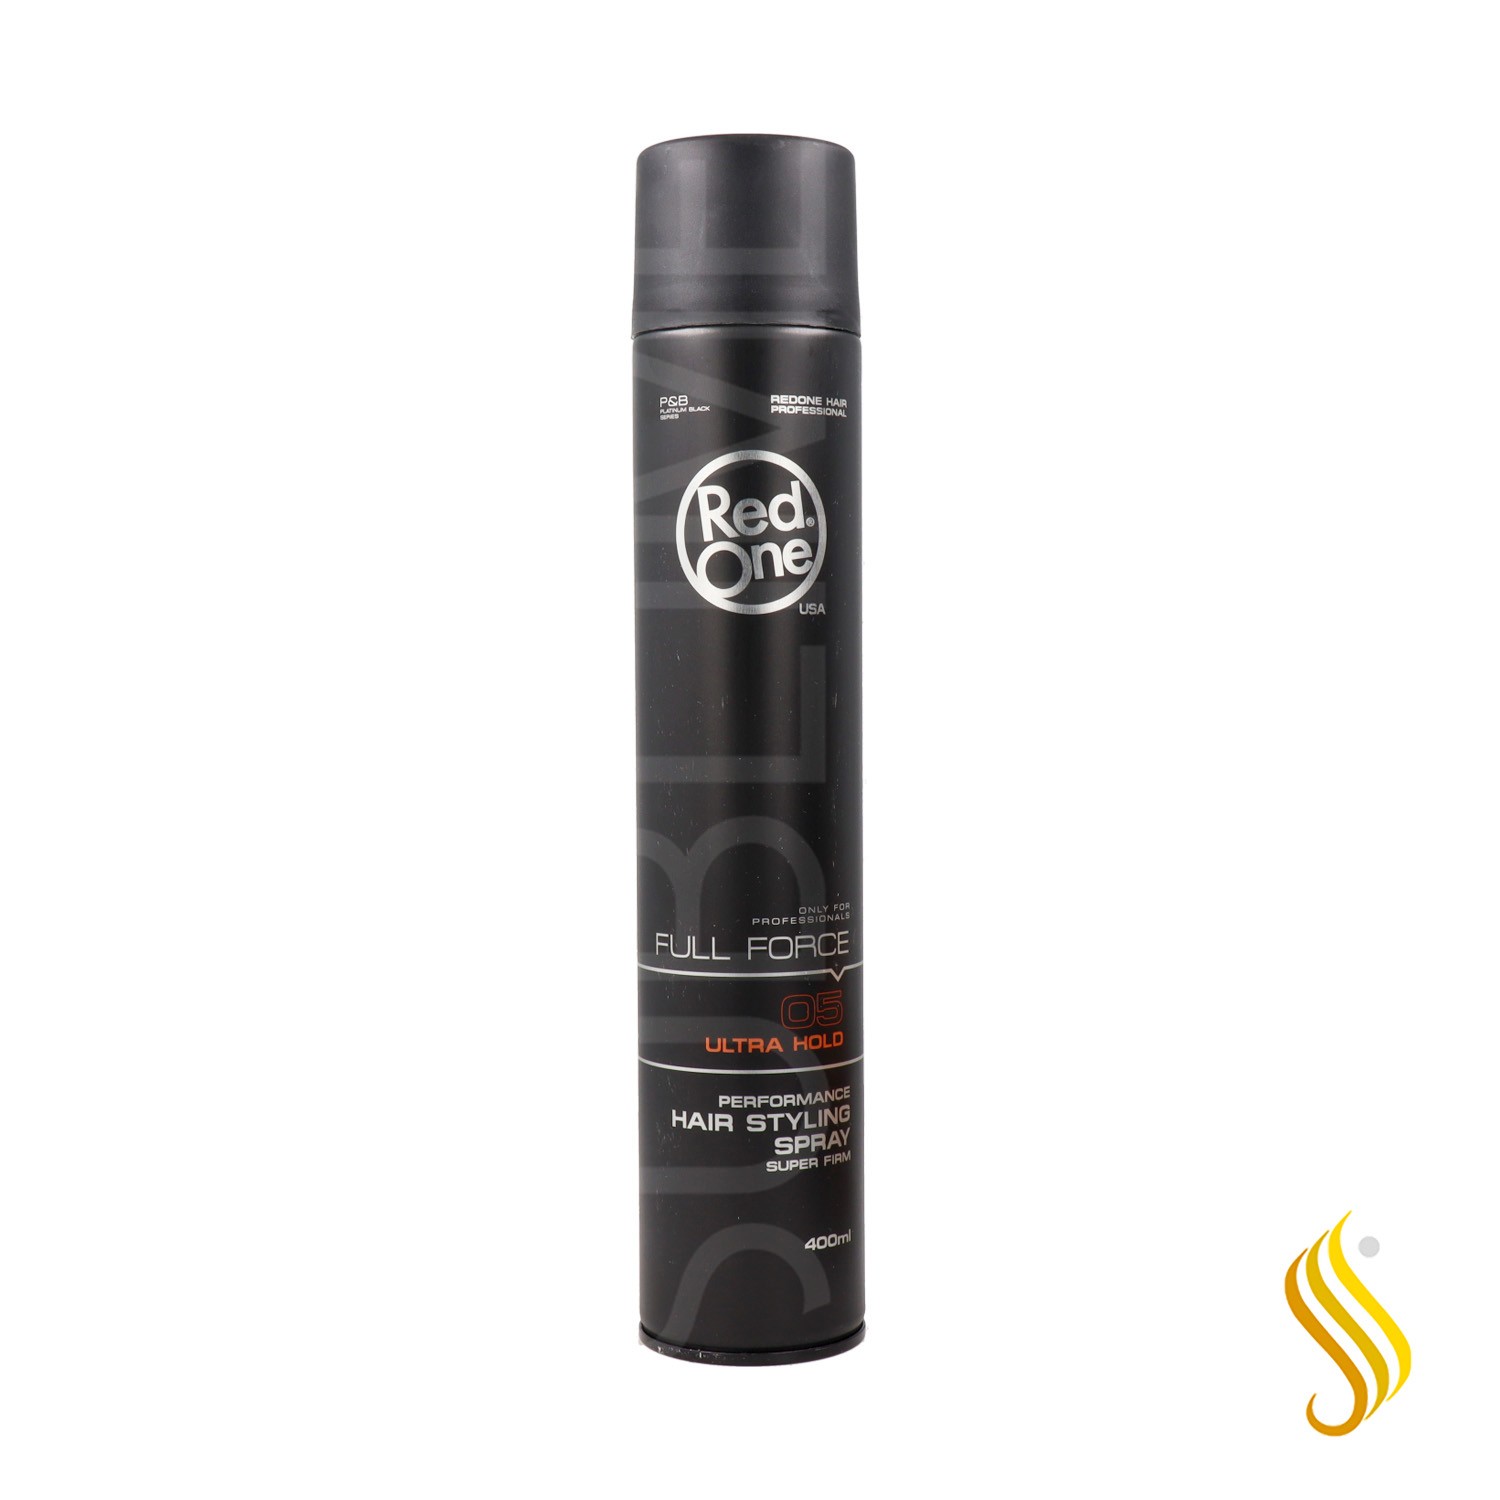 Red One Hair Styling Spray Full Force Ultra Hold 400 ml